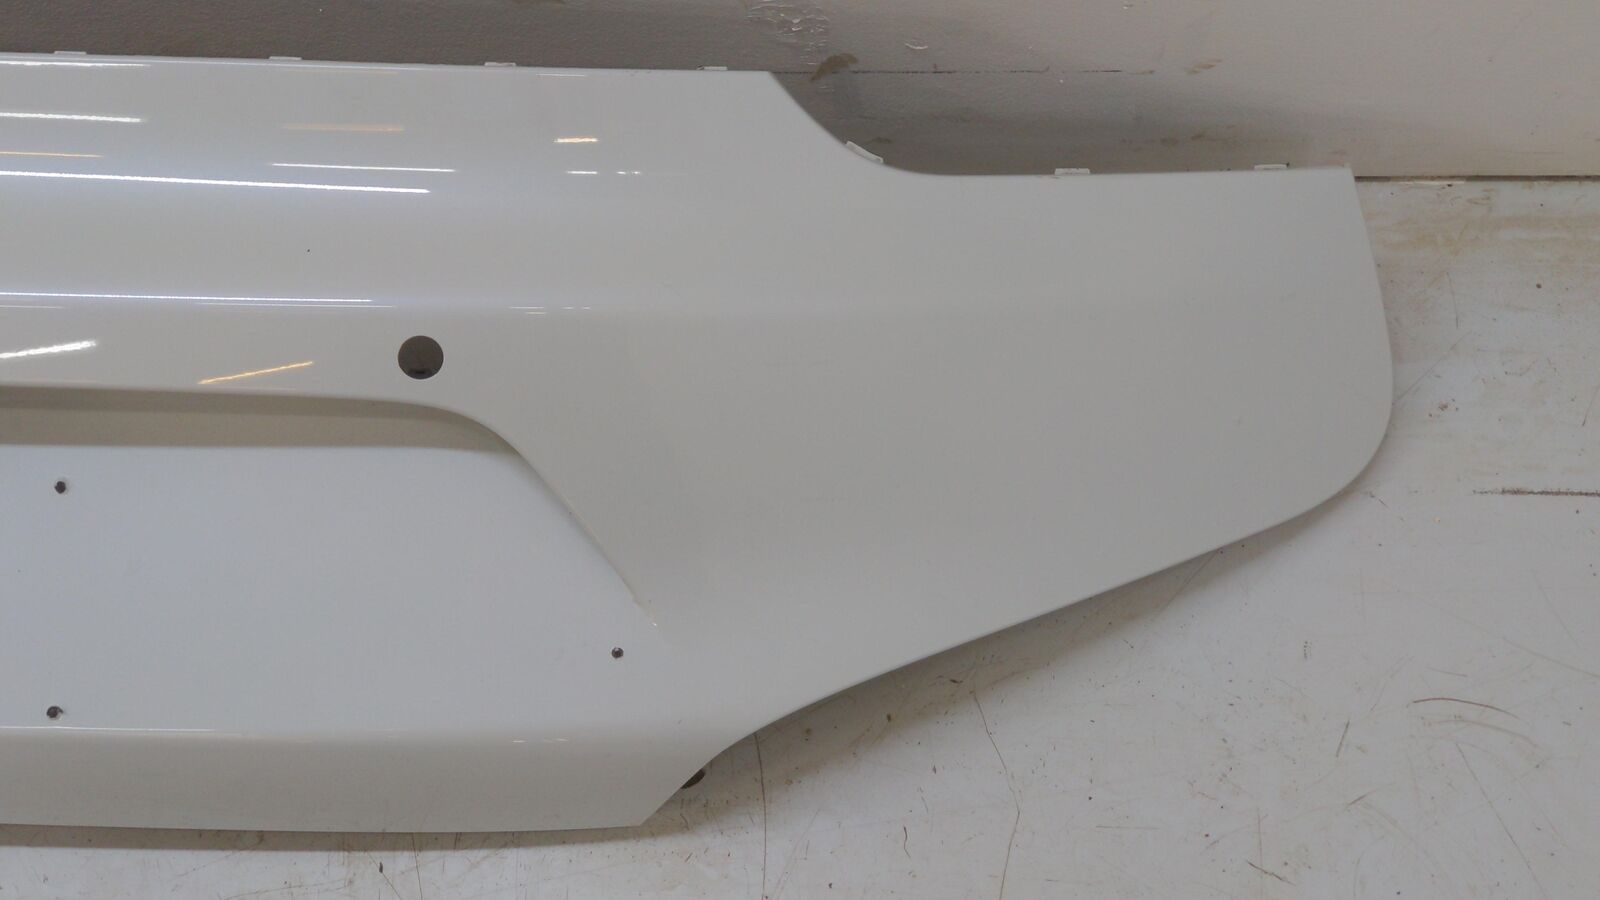 14-19 BMW I8 REAR Bumper Cover *chipped Scratched Cracked* White 51127336299